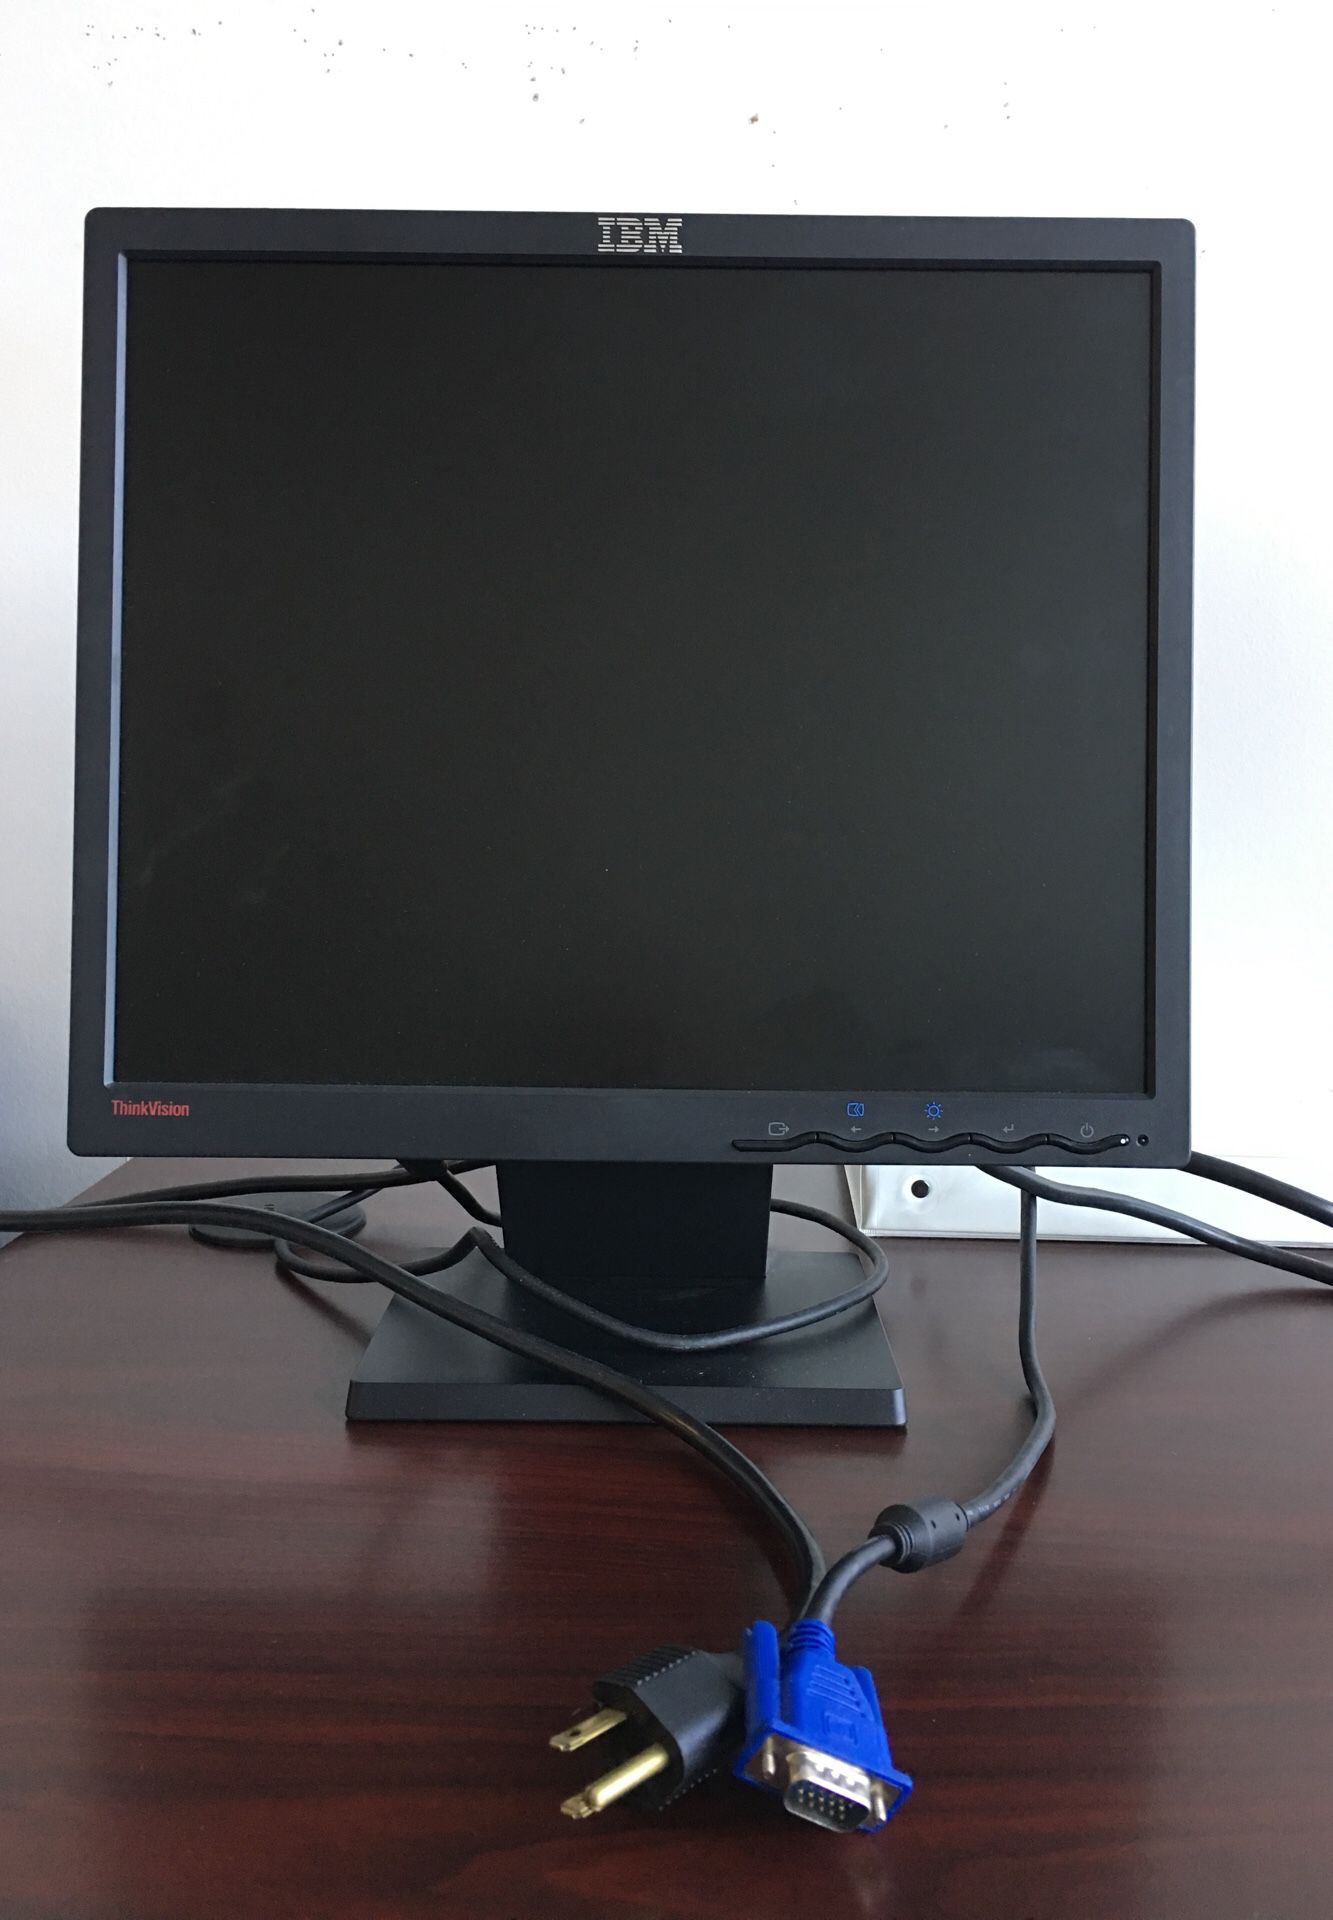 IBM 9417-AB1 LCD monitor with power cord & VGA cable